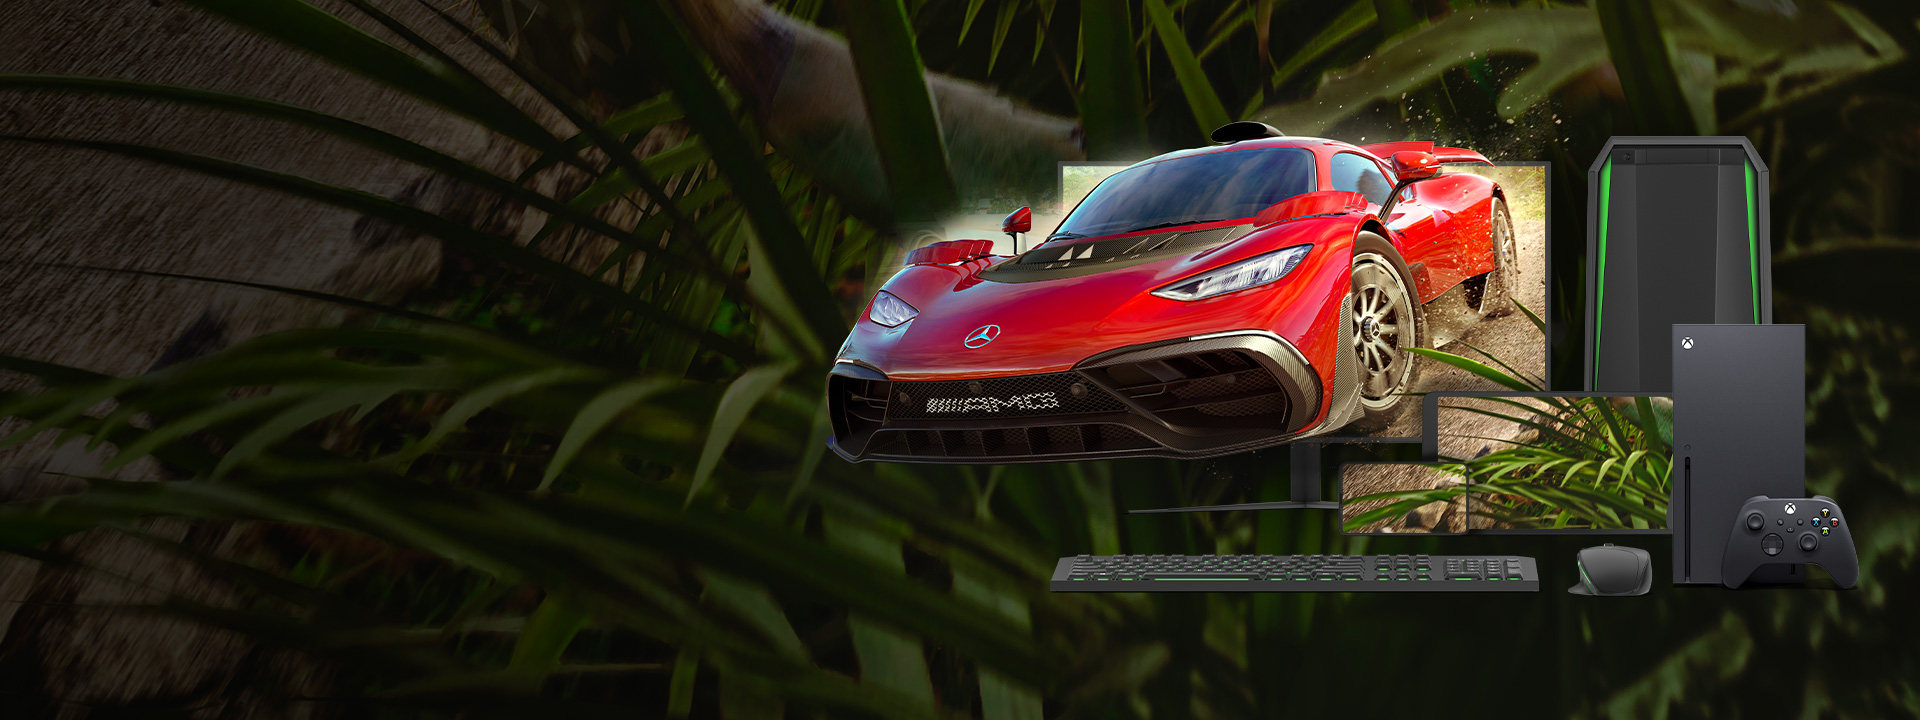 Multiple smart devices showing Forza Horizon 5 game art across the screens.